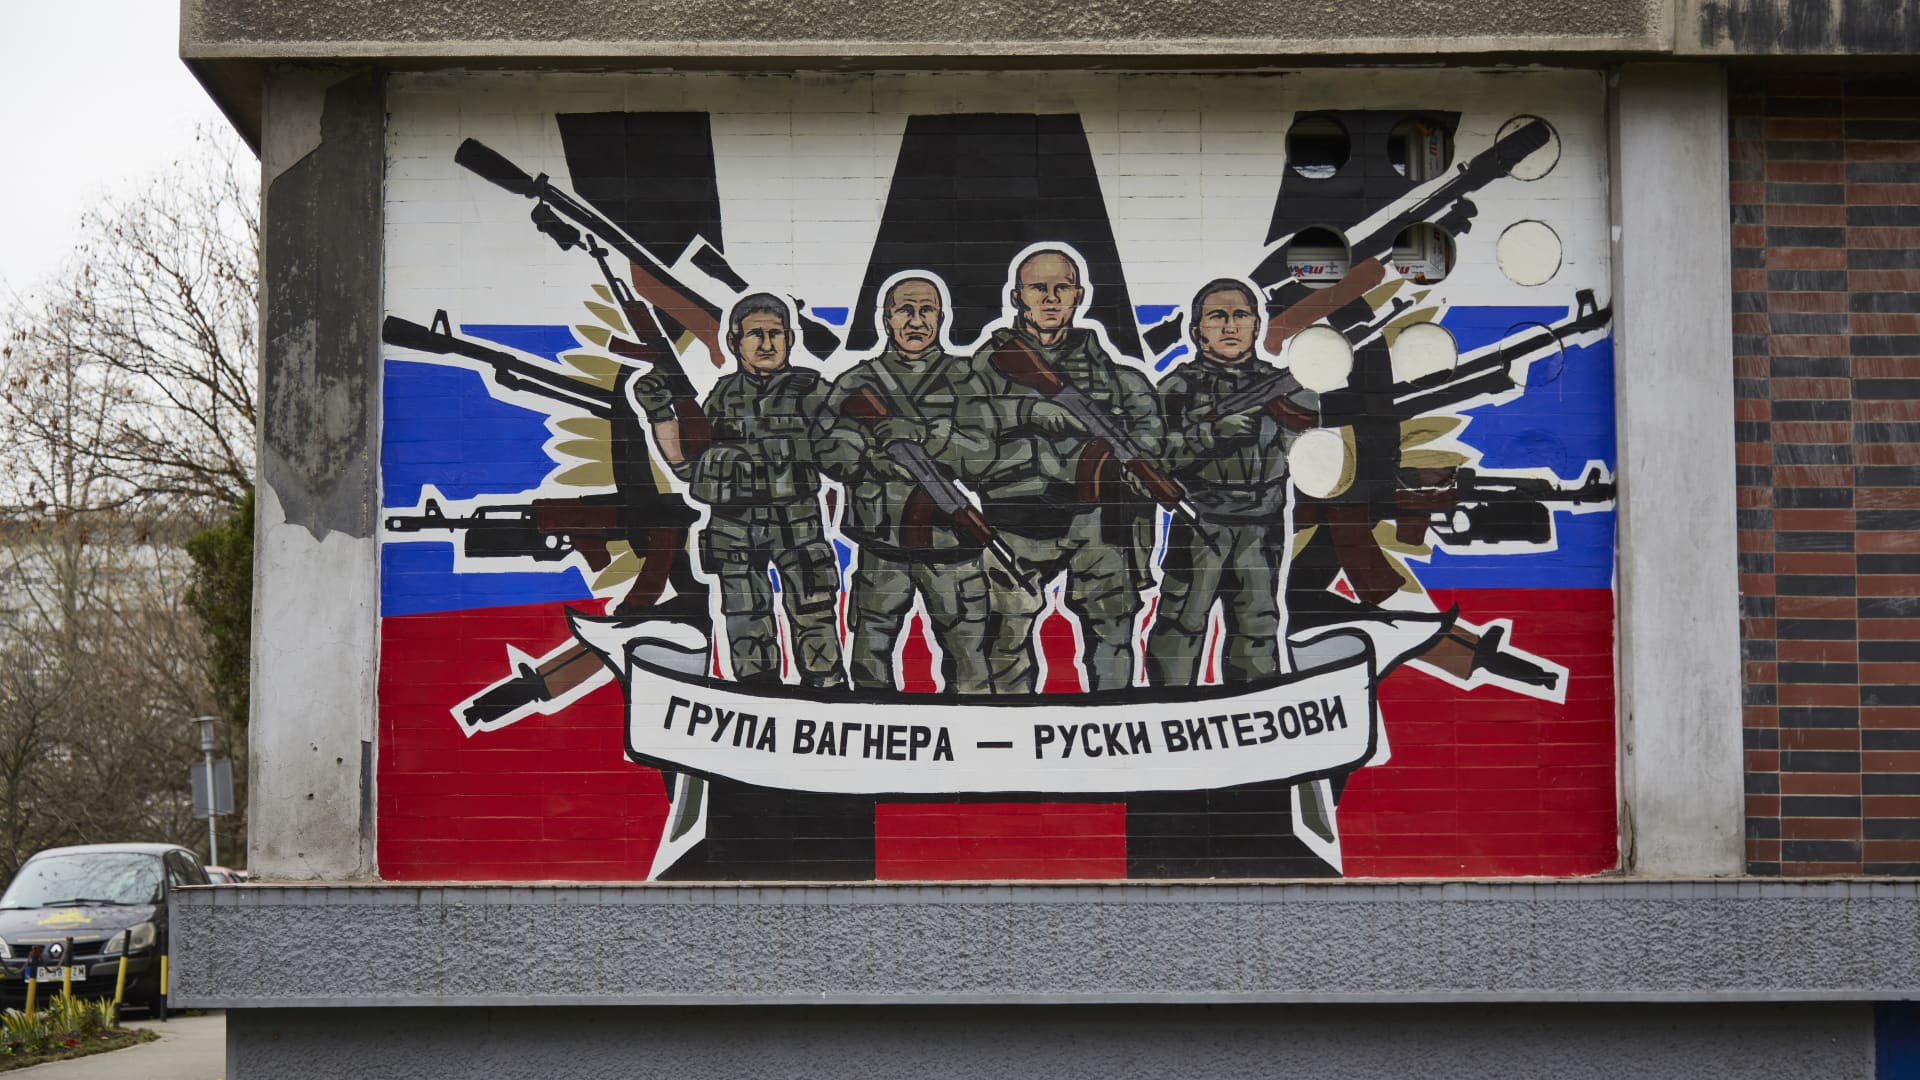 A mural praises the Russian Wagner group and its mercenaries fighting in Ukraine on March 30, 2022 in Belgrade, Serbia.